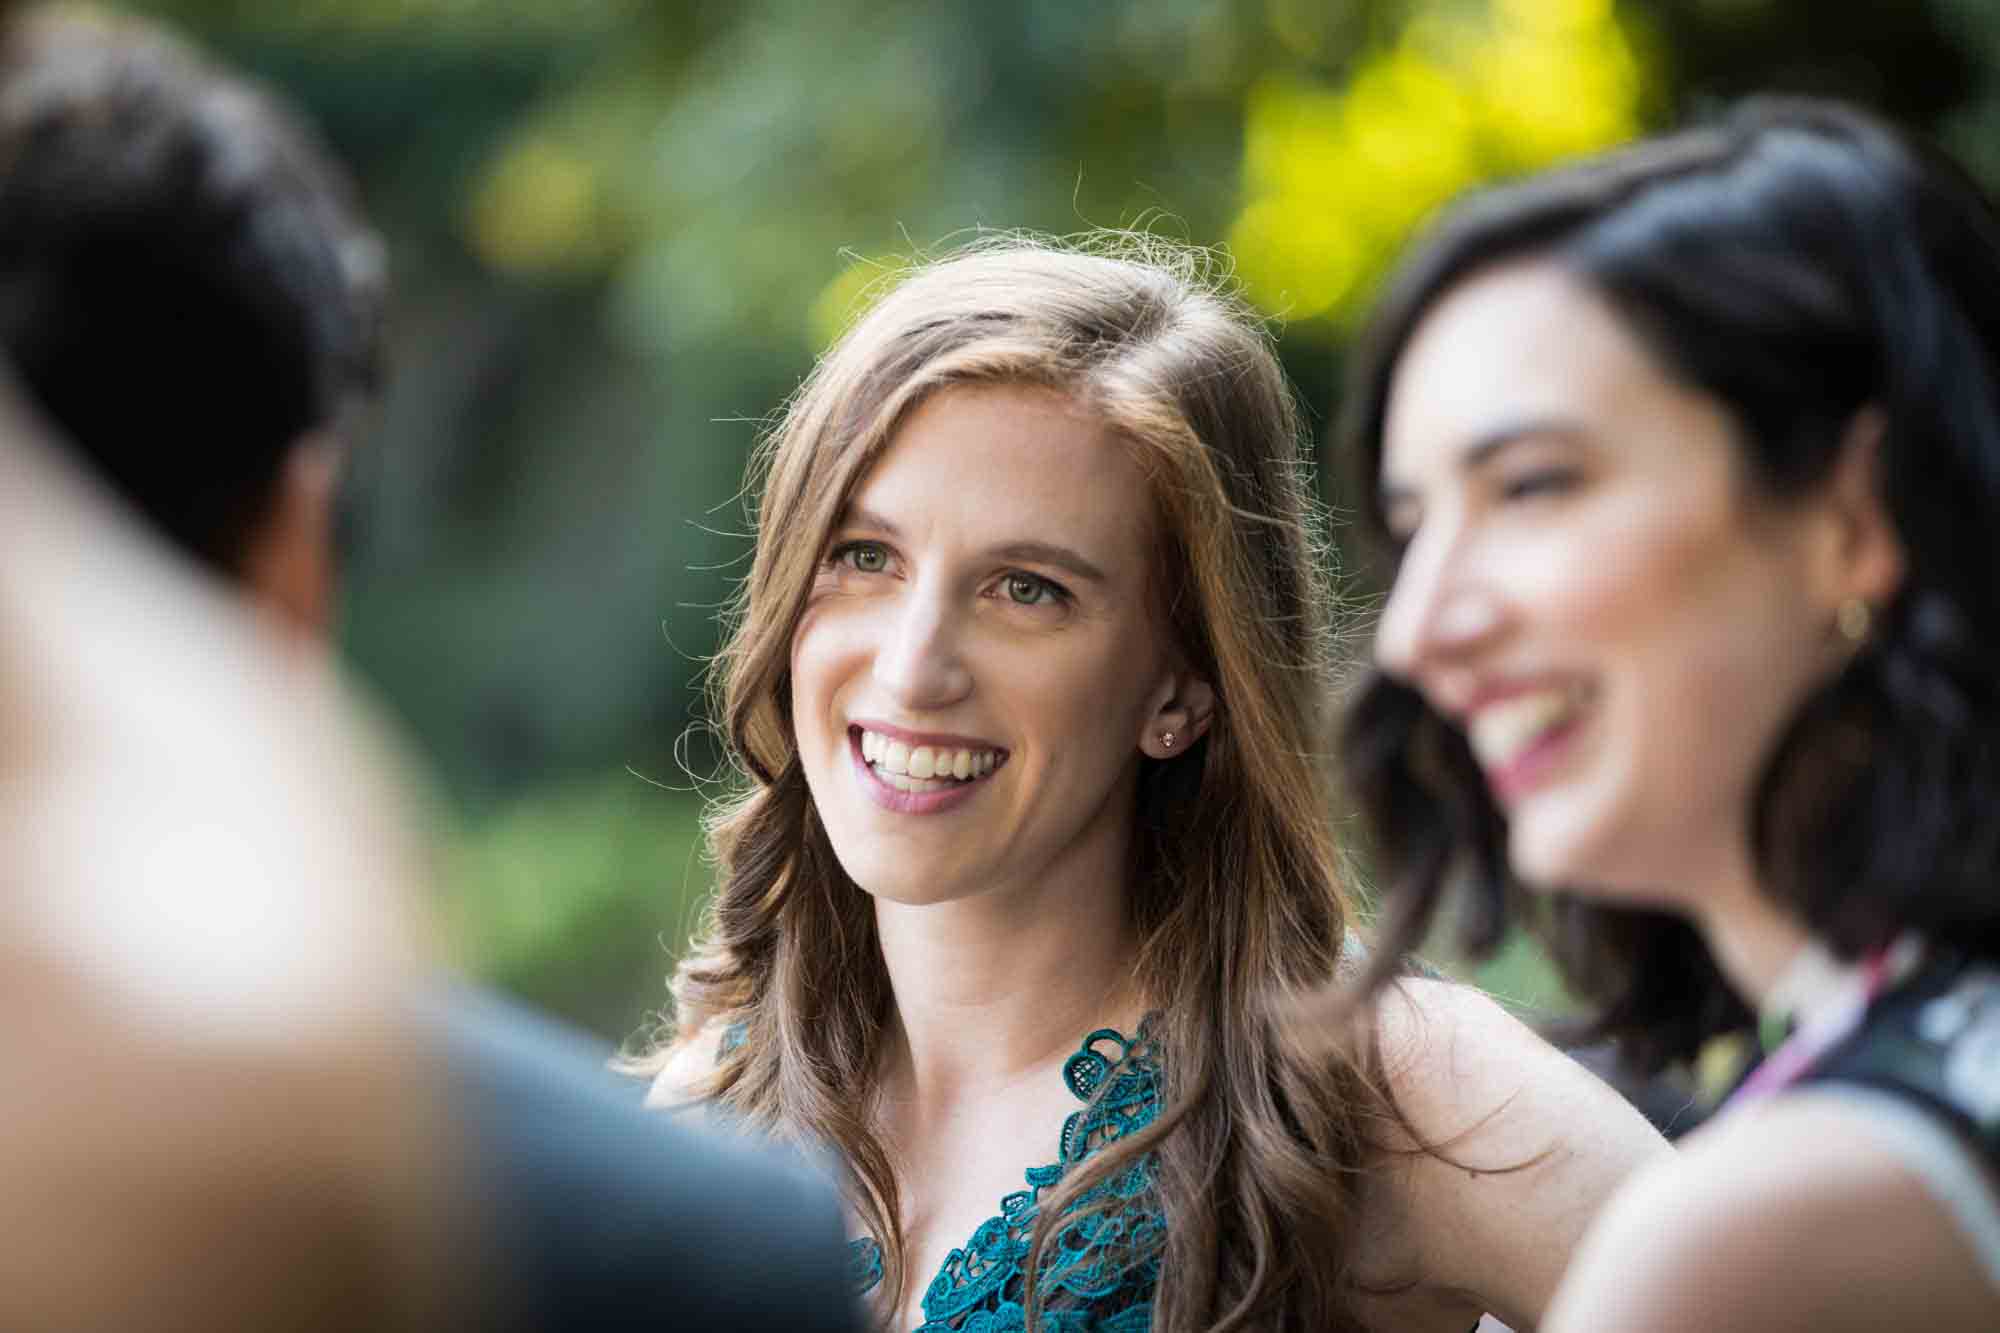 Female guests smiling during a Conservatory Garden wedding in Central Park